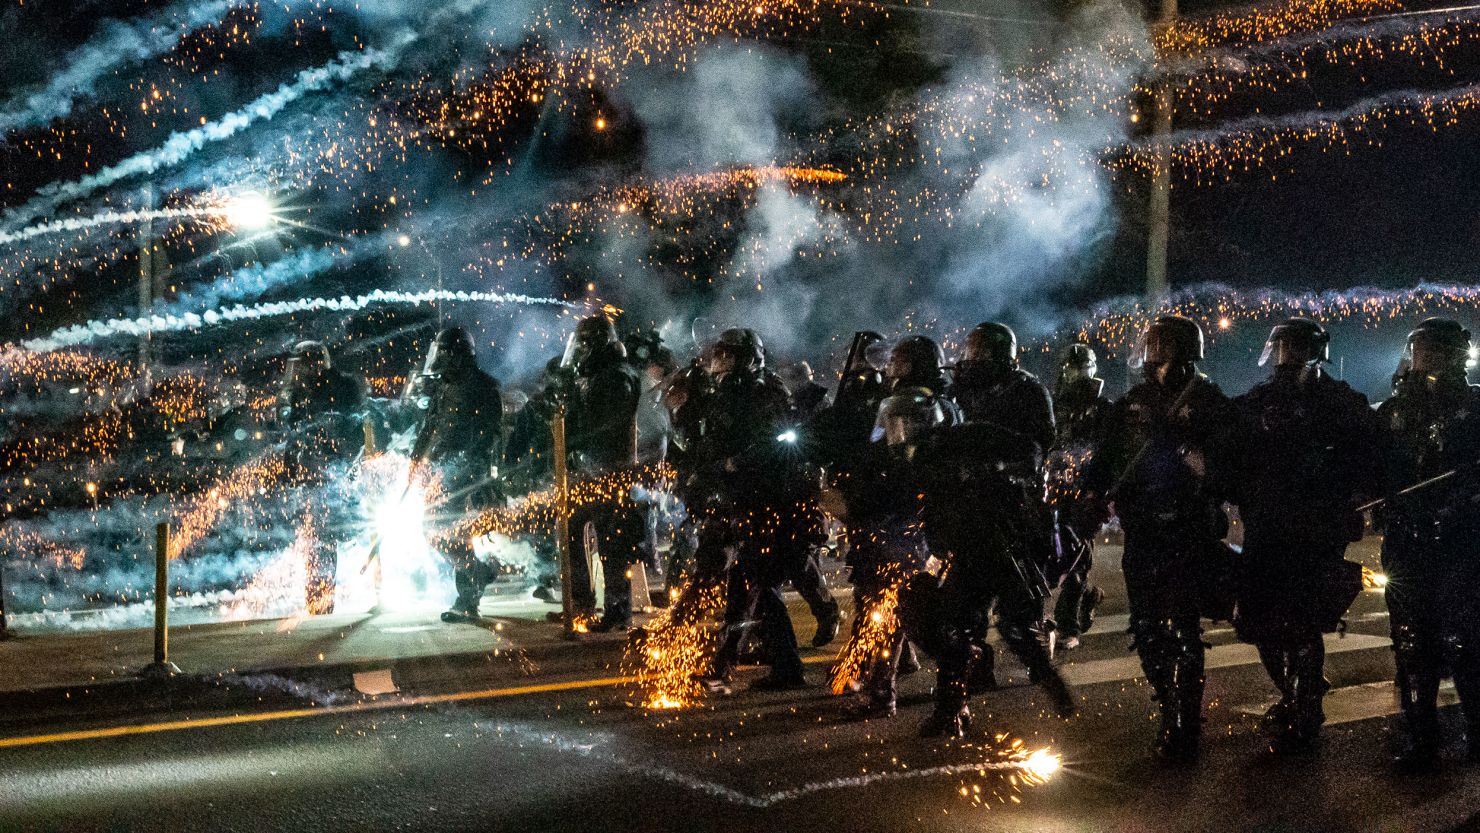 Police said protesters threw fire bombs, fireworks and mortars at officers, which lead authorities to declare the march a riot and ordered people to leave the area.
